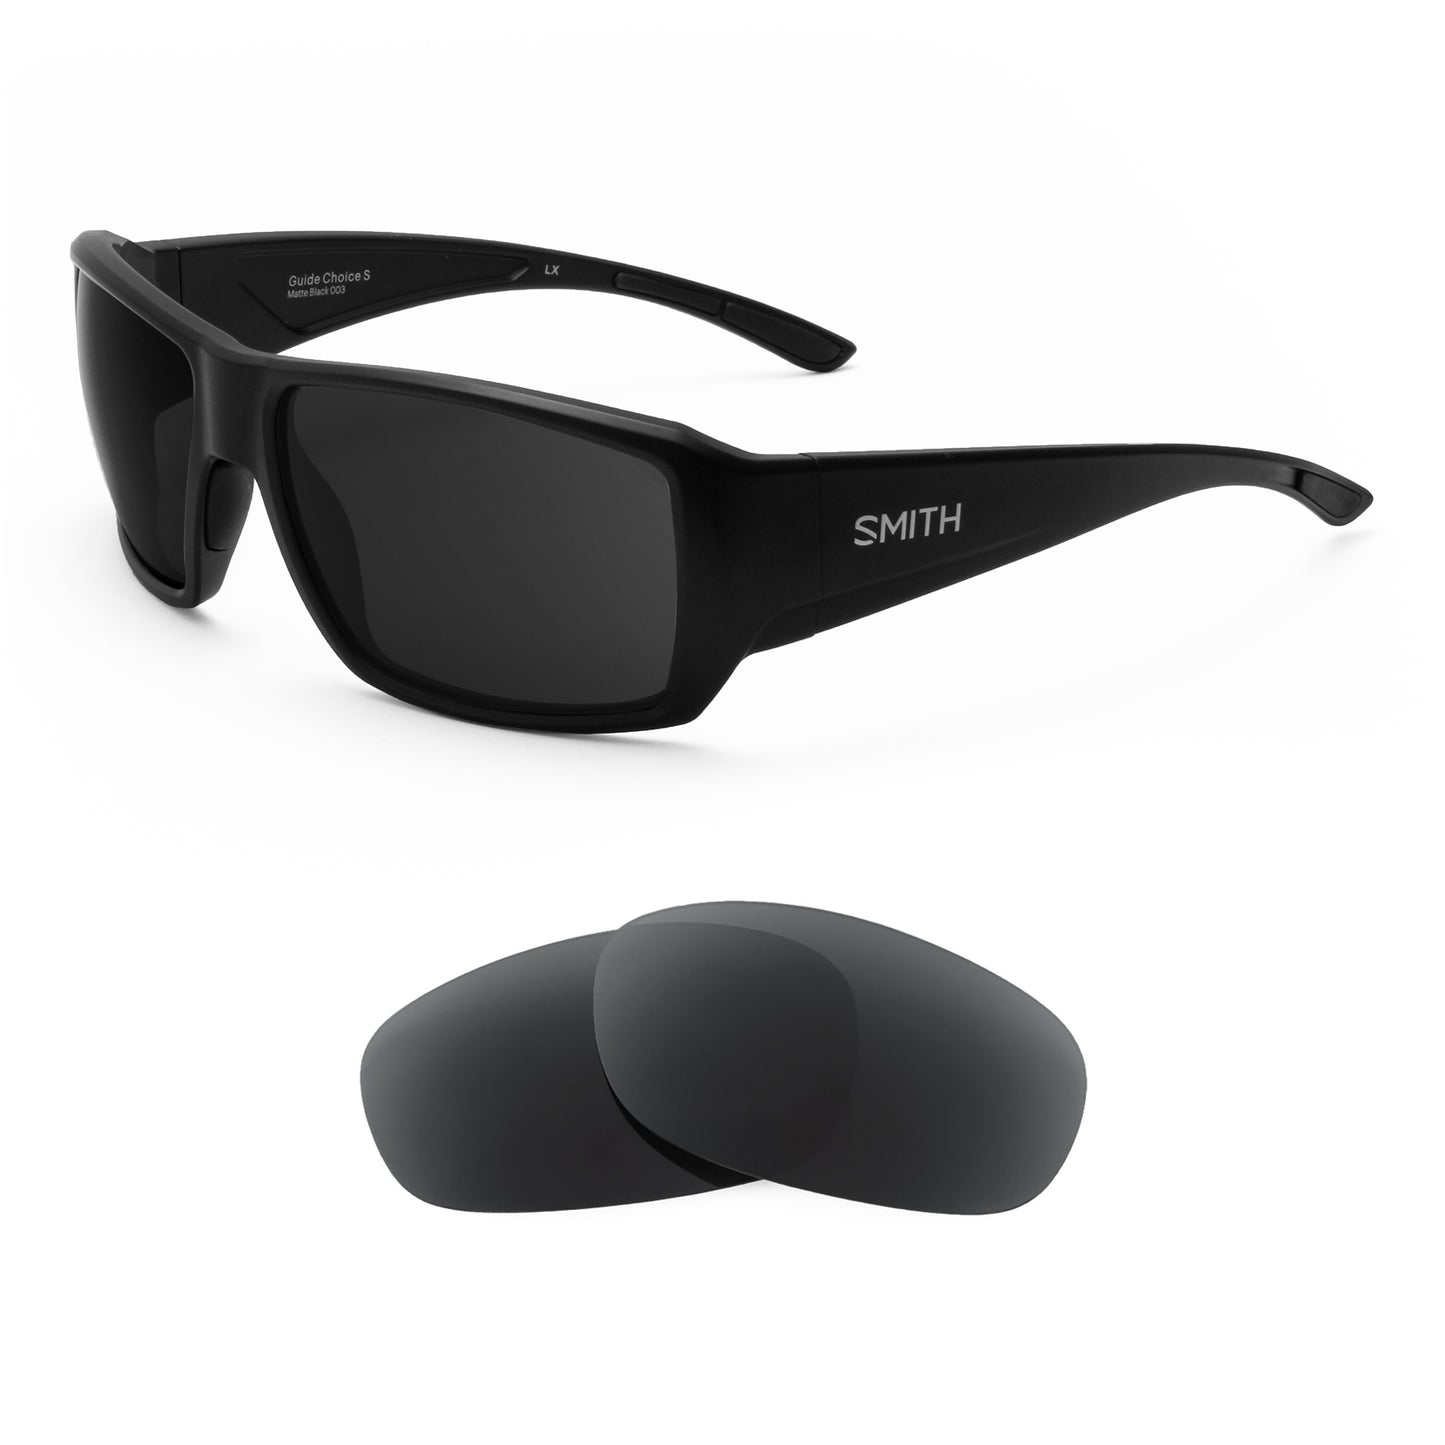 Smith Guide's Choice S sunglasses with replacement lenses